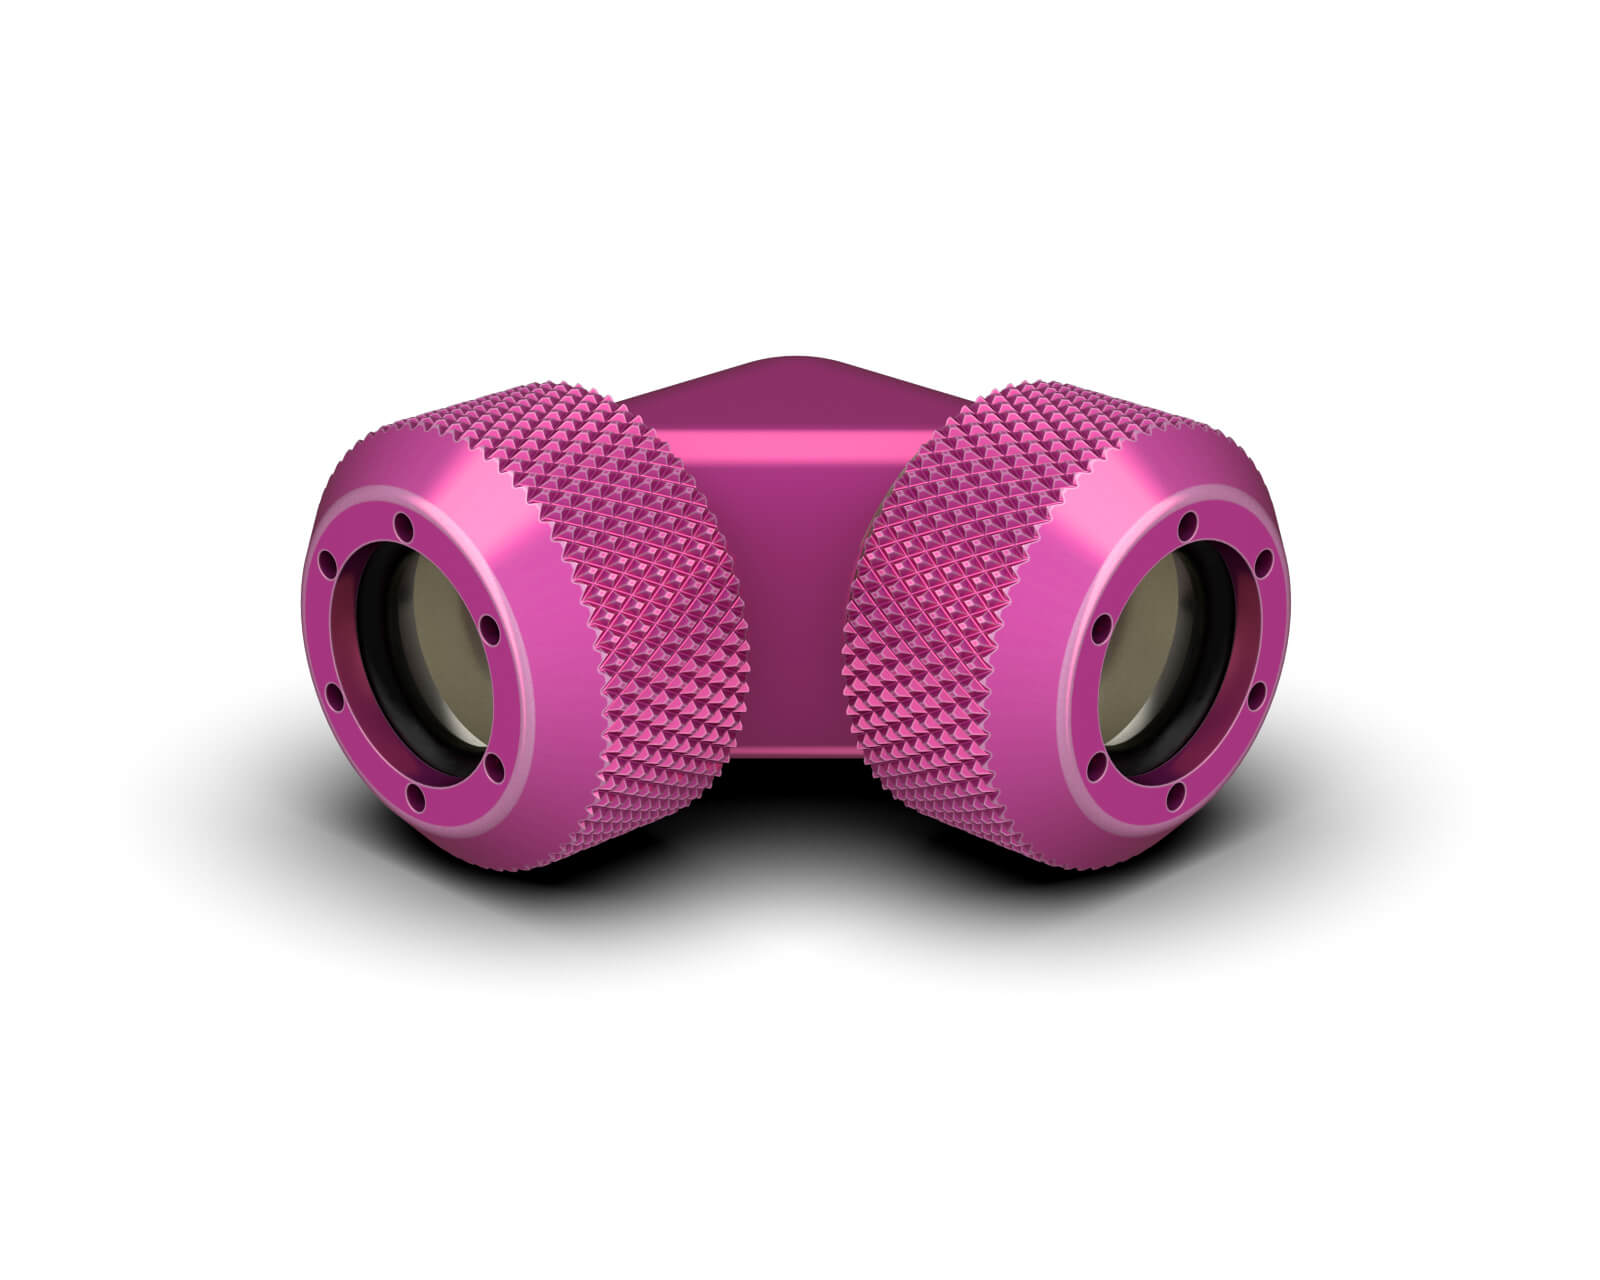 PrimoChill 1/2in. Rigid RevolverSX 90 Degree Fitting Set - PrimoChill - KEEPING IT COOL Candy Pink